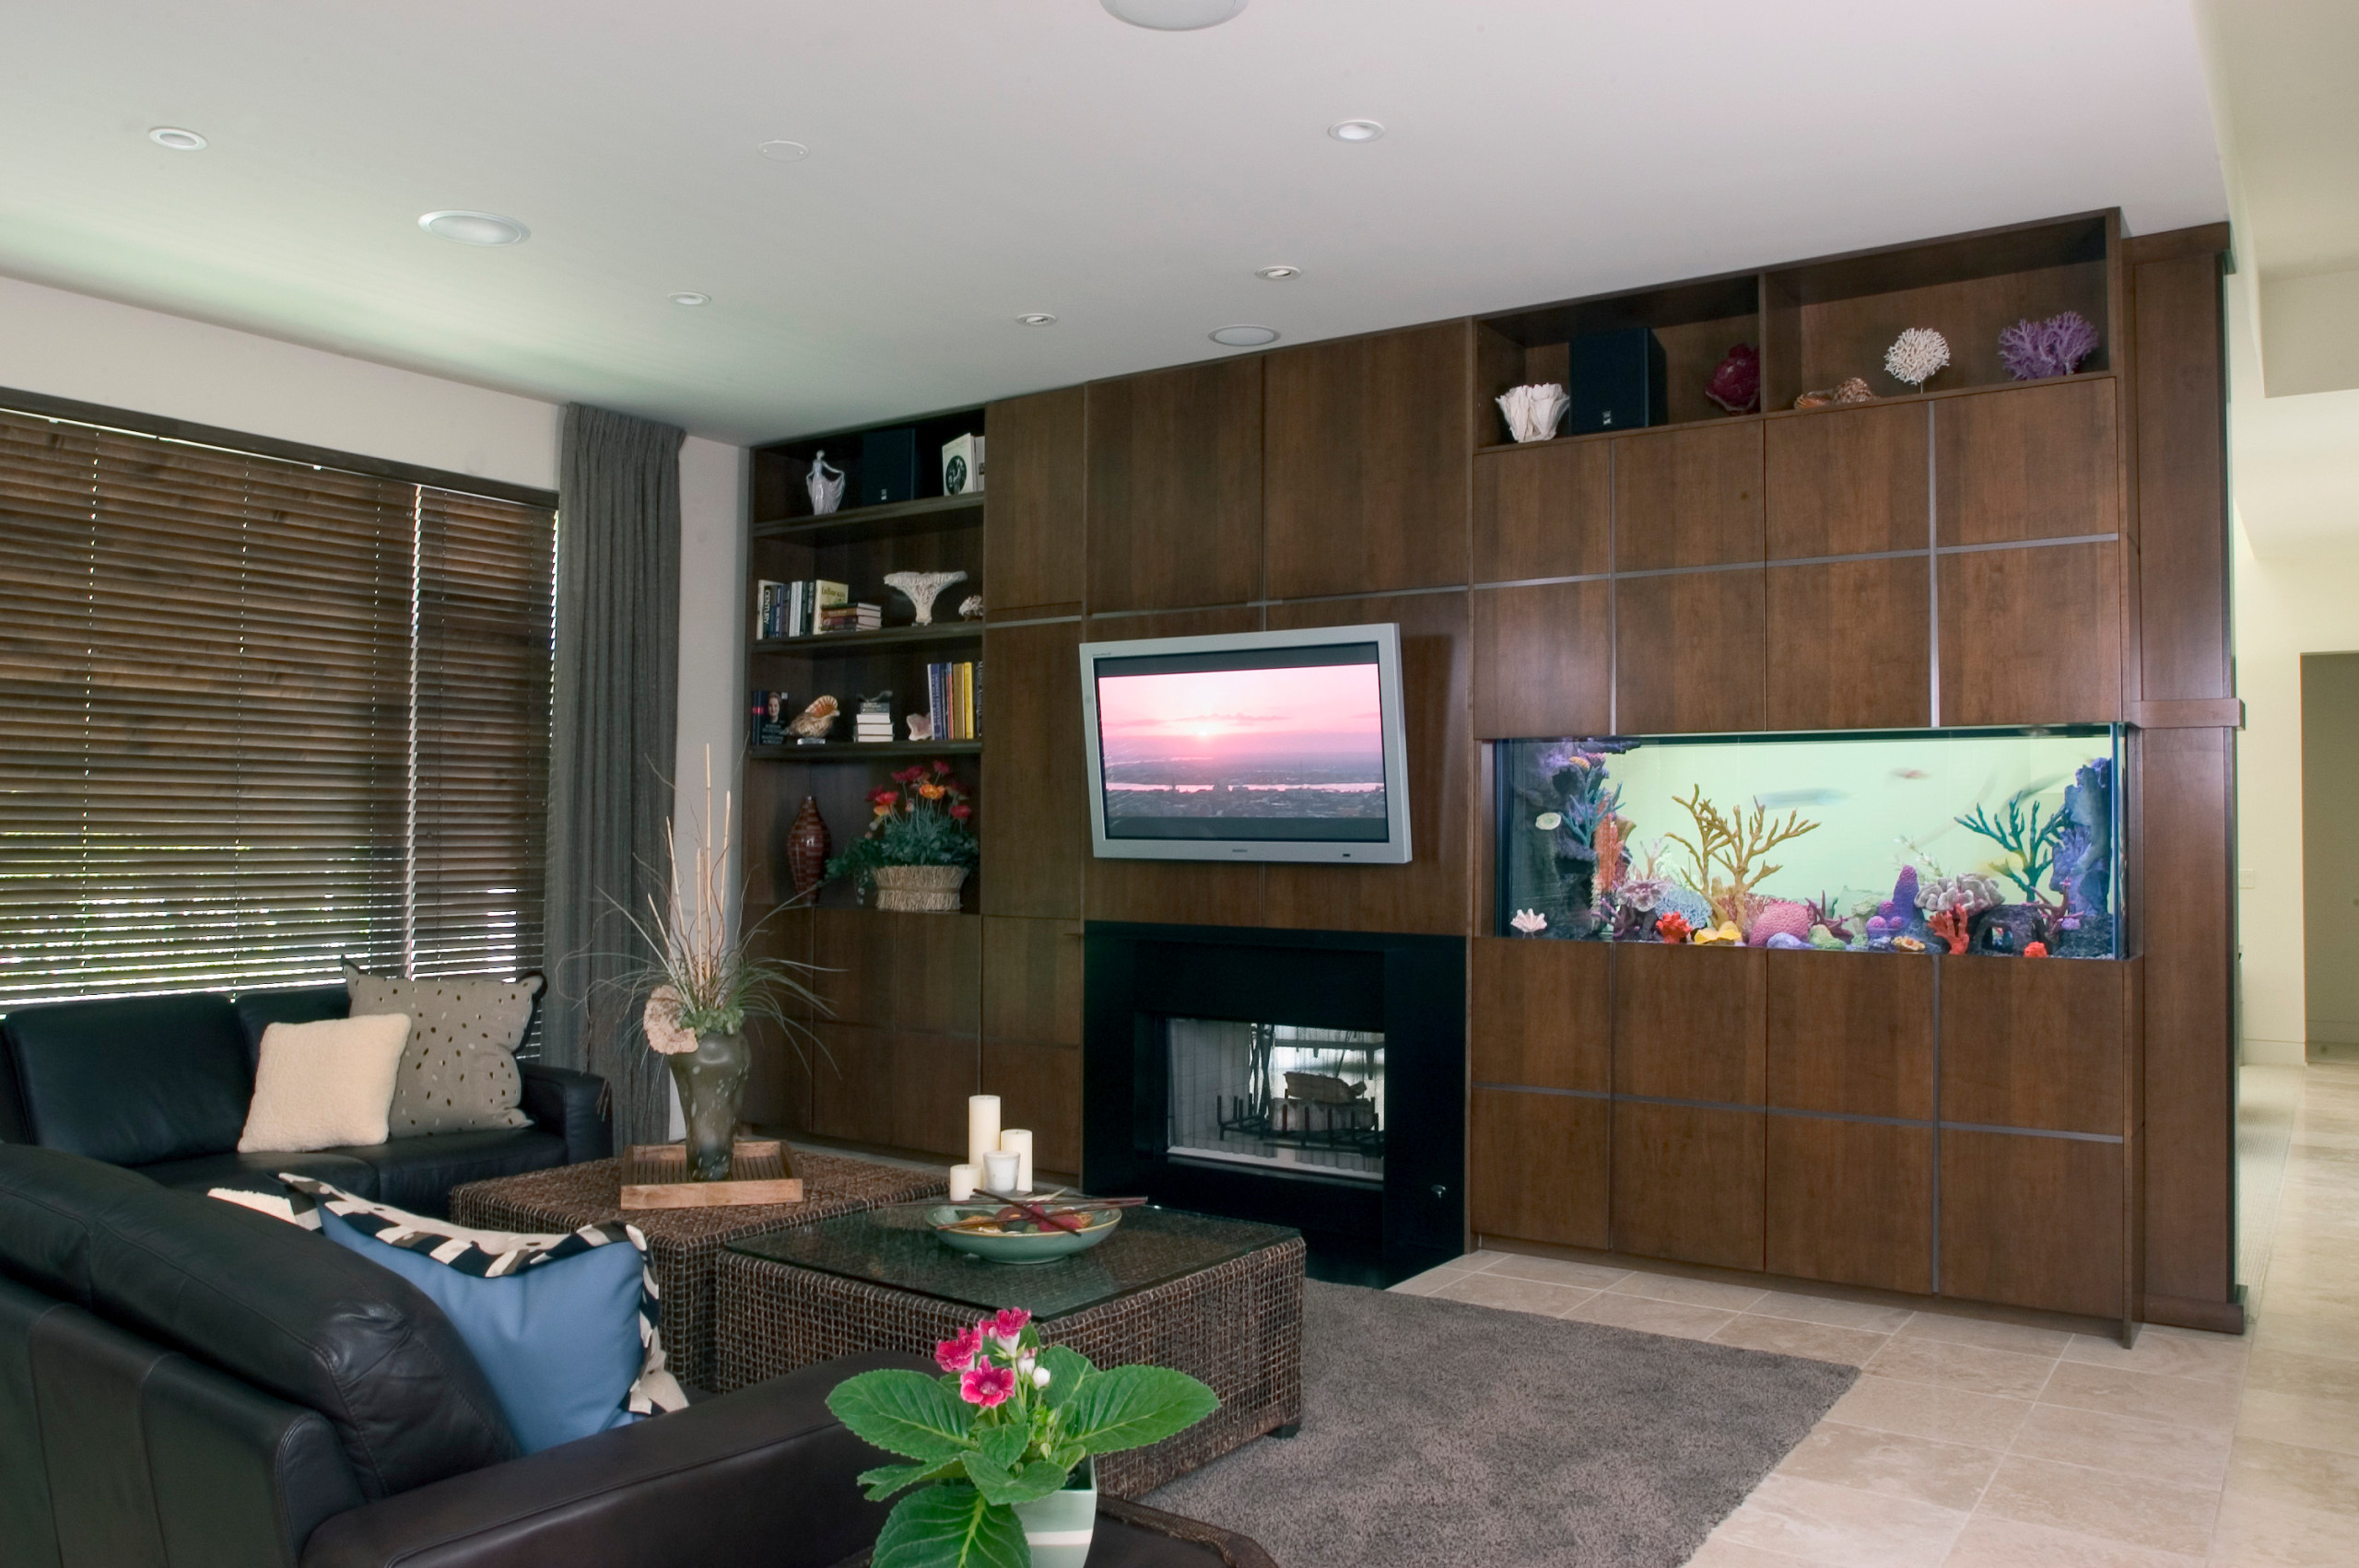 Built Ins With Tv And Fish Tank - Photos & Ideas | Houzz